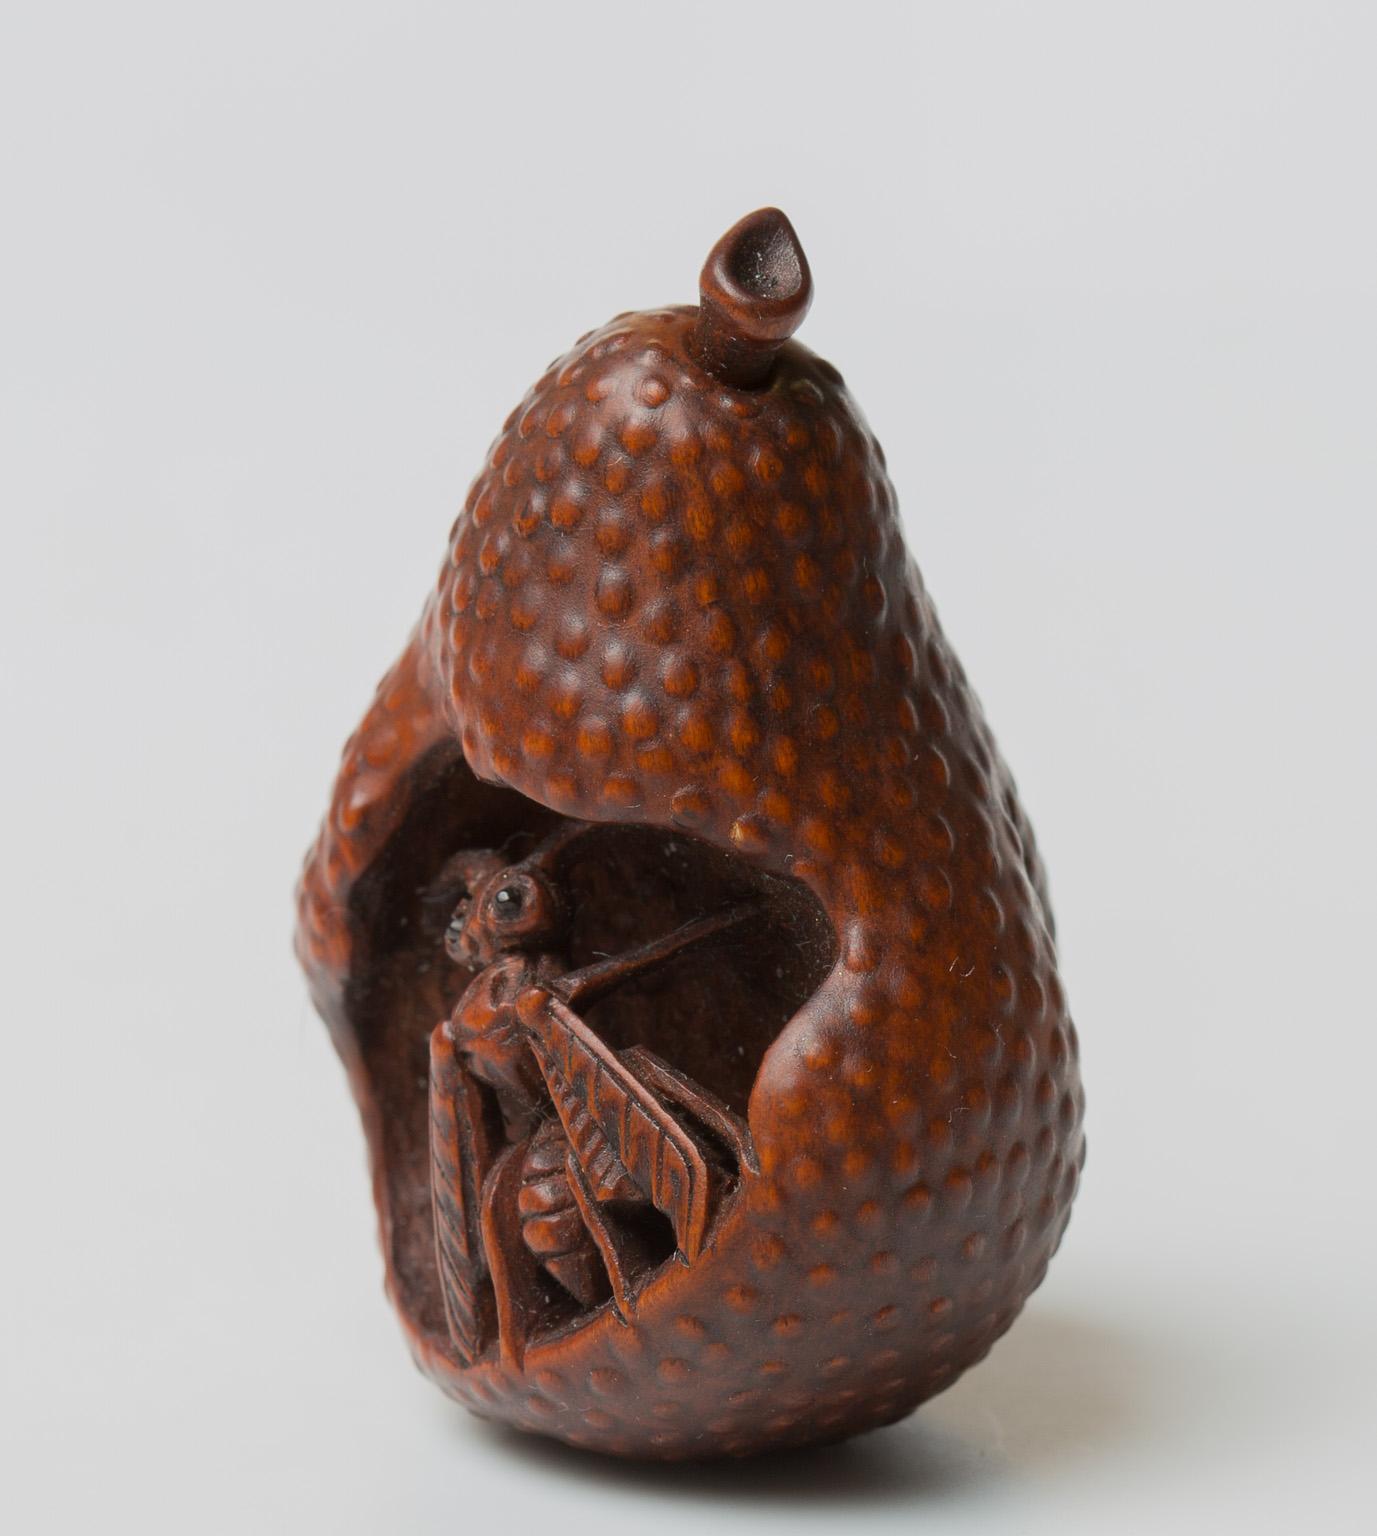 Japanese Wood Netsuke with a Wasp in a Pear, Nagoya School, 19th Century 7